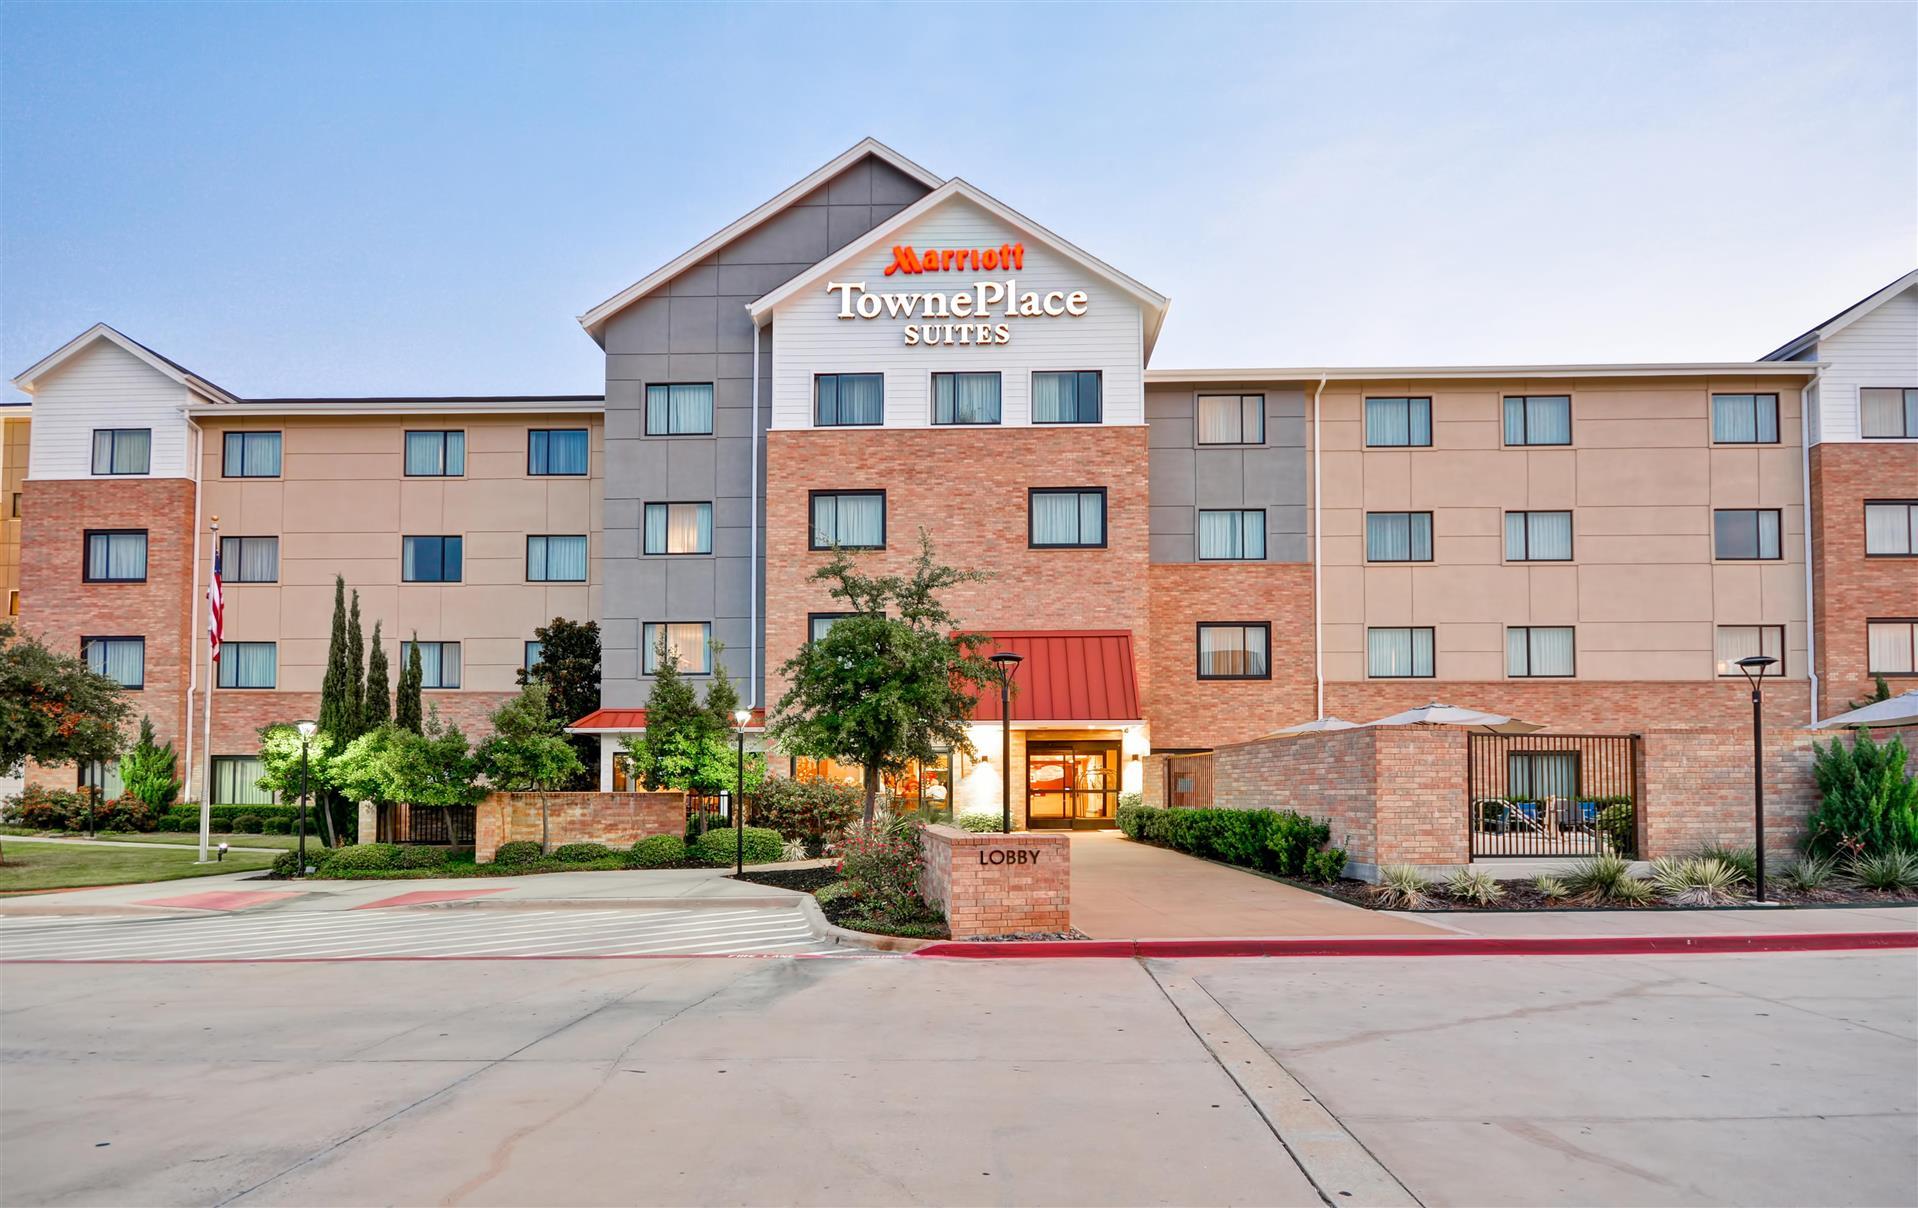 TownePlace Suites Dallas Lewisville in Lewisville, TX